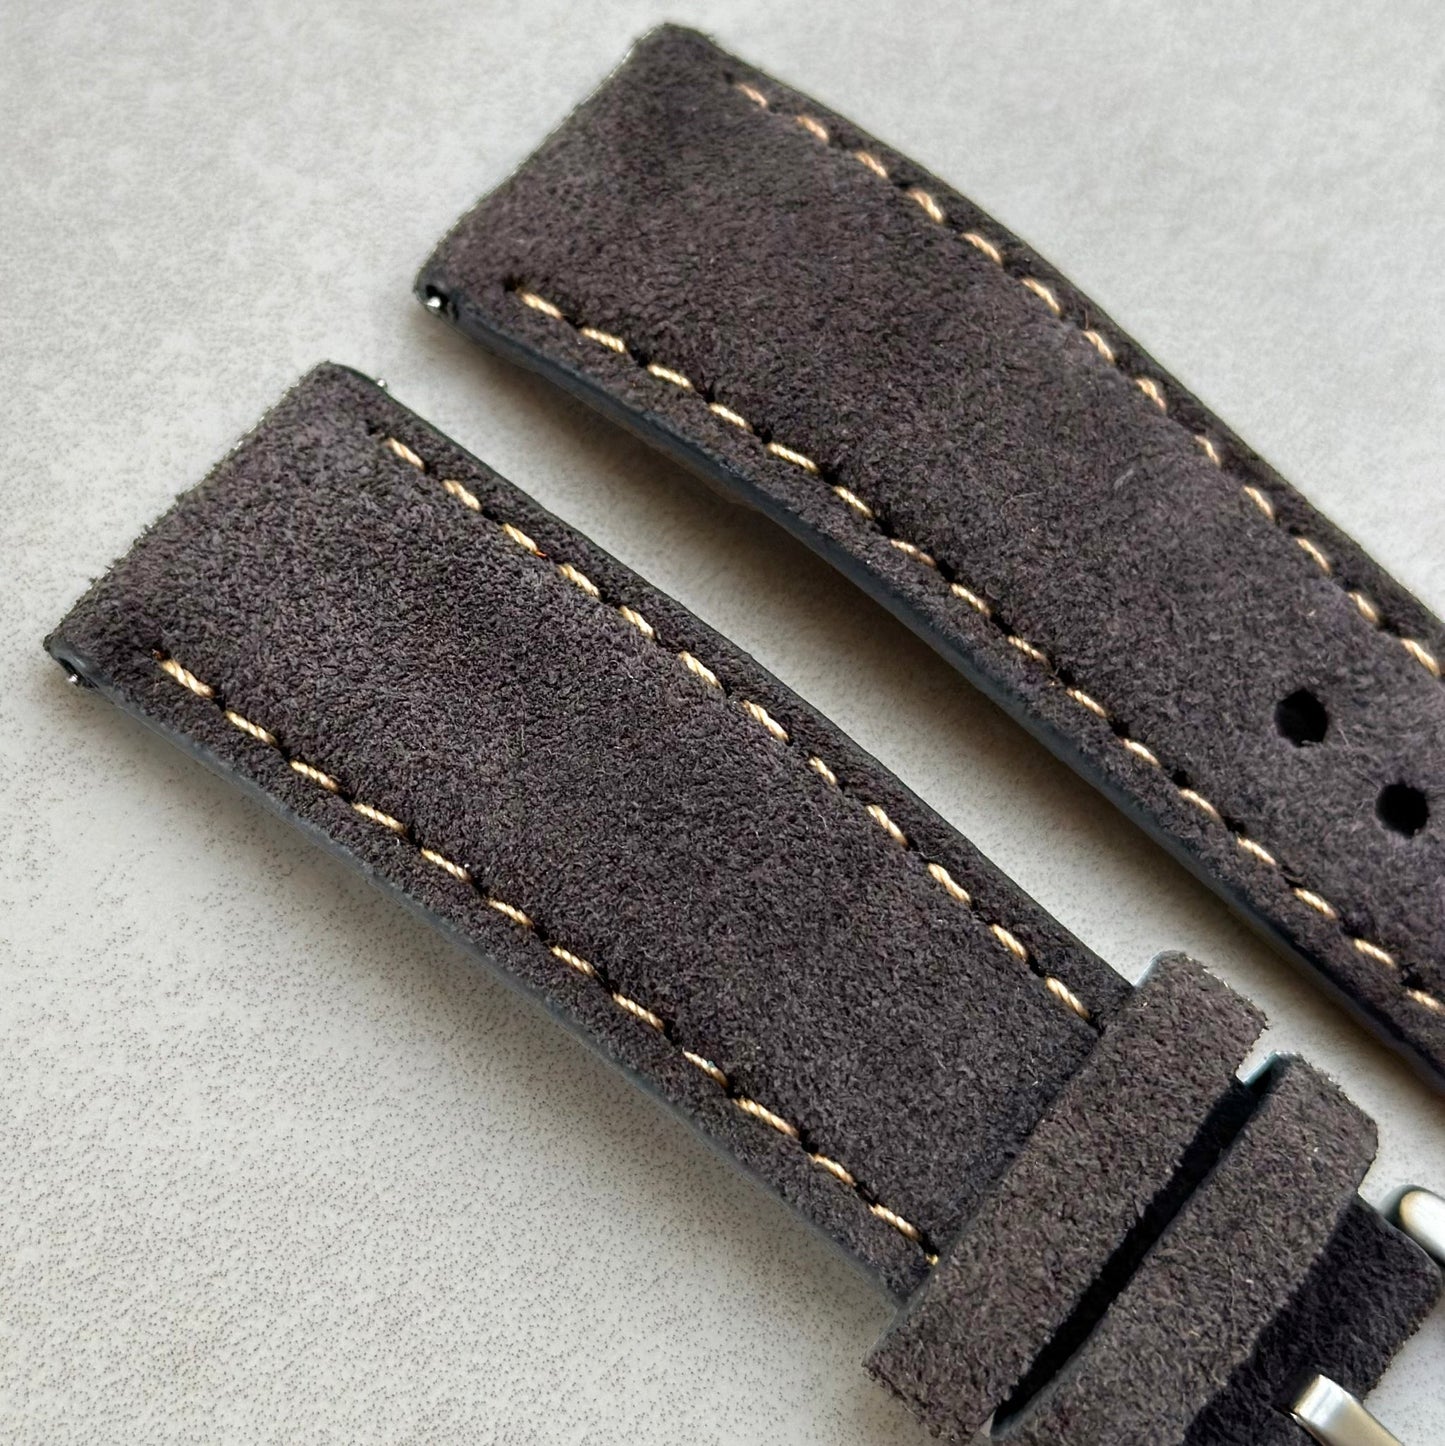 Top of the Paris gunmetal grey suede watch strap. Padded suede strap. Contrast ivory stitching. Watch And Strap.